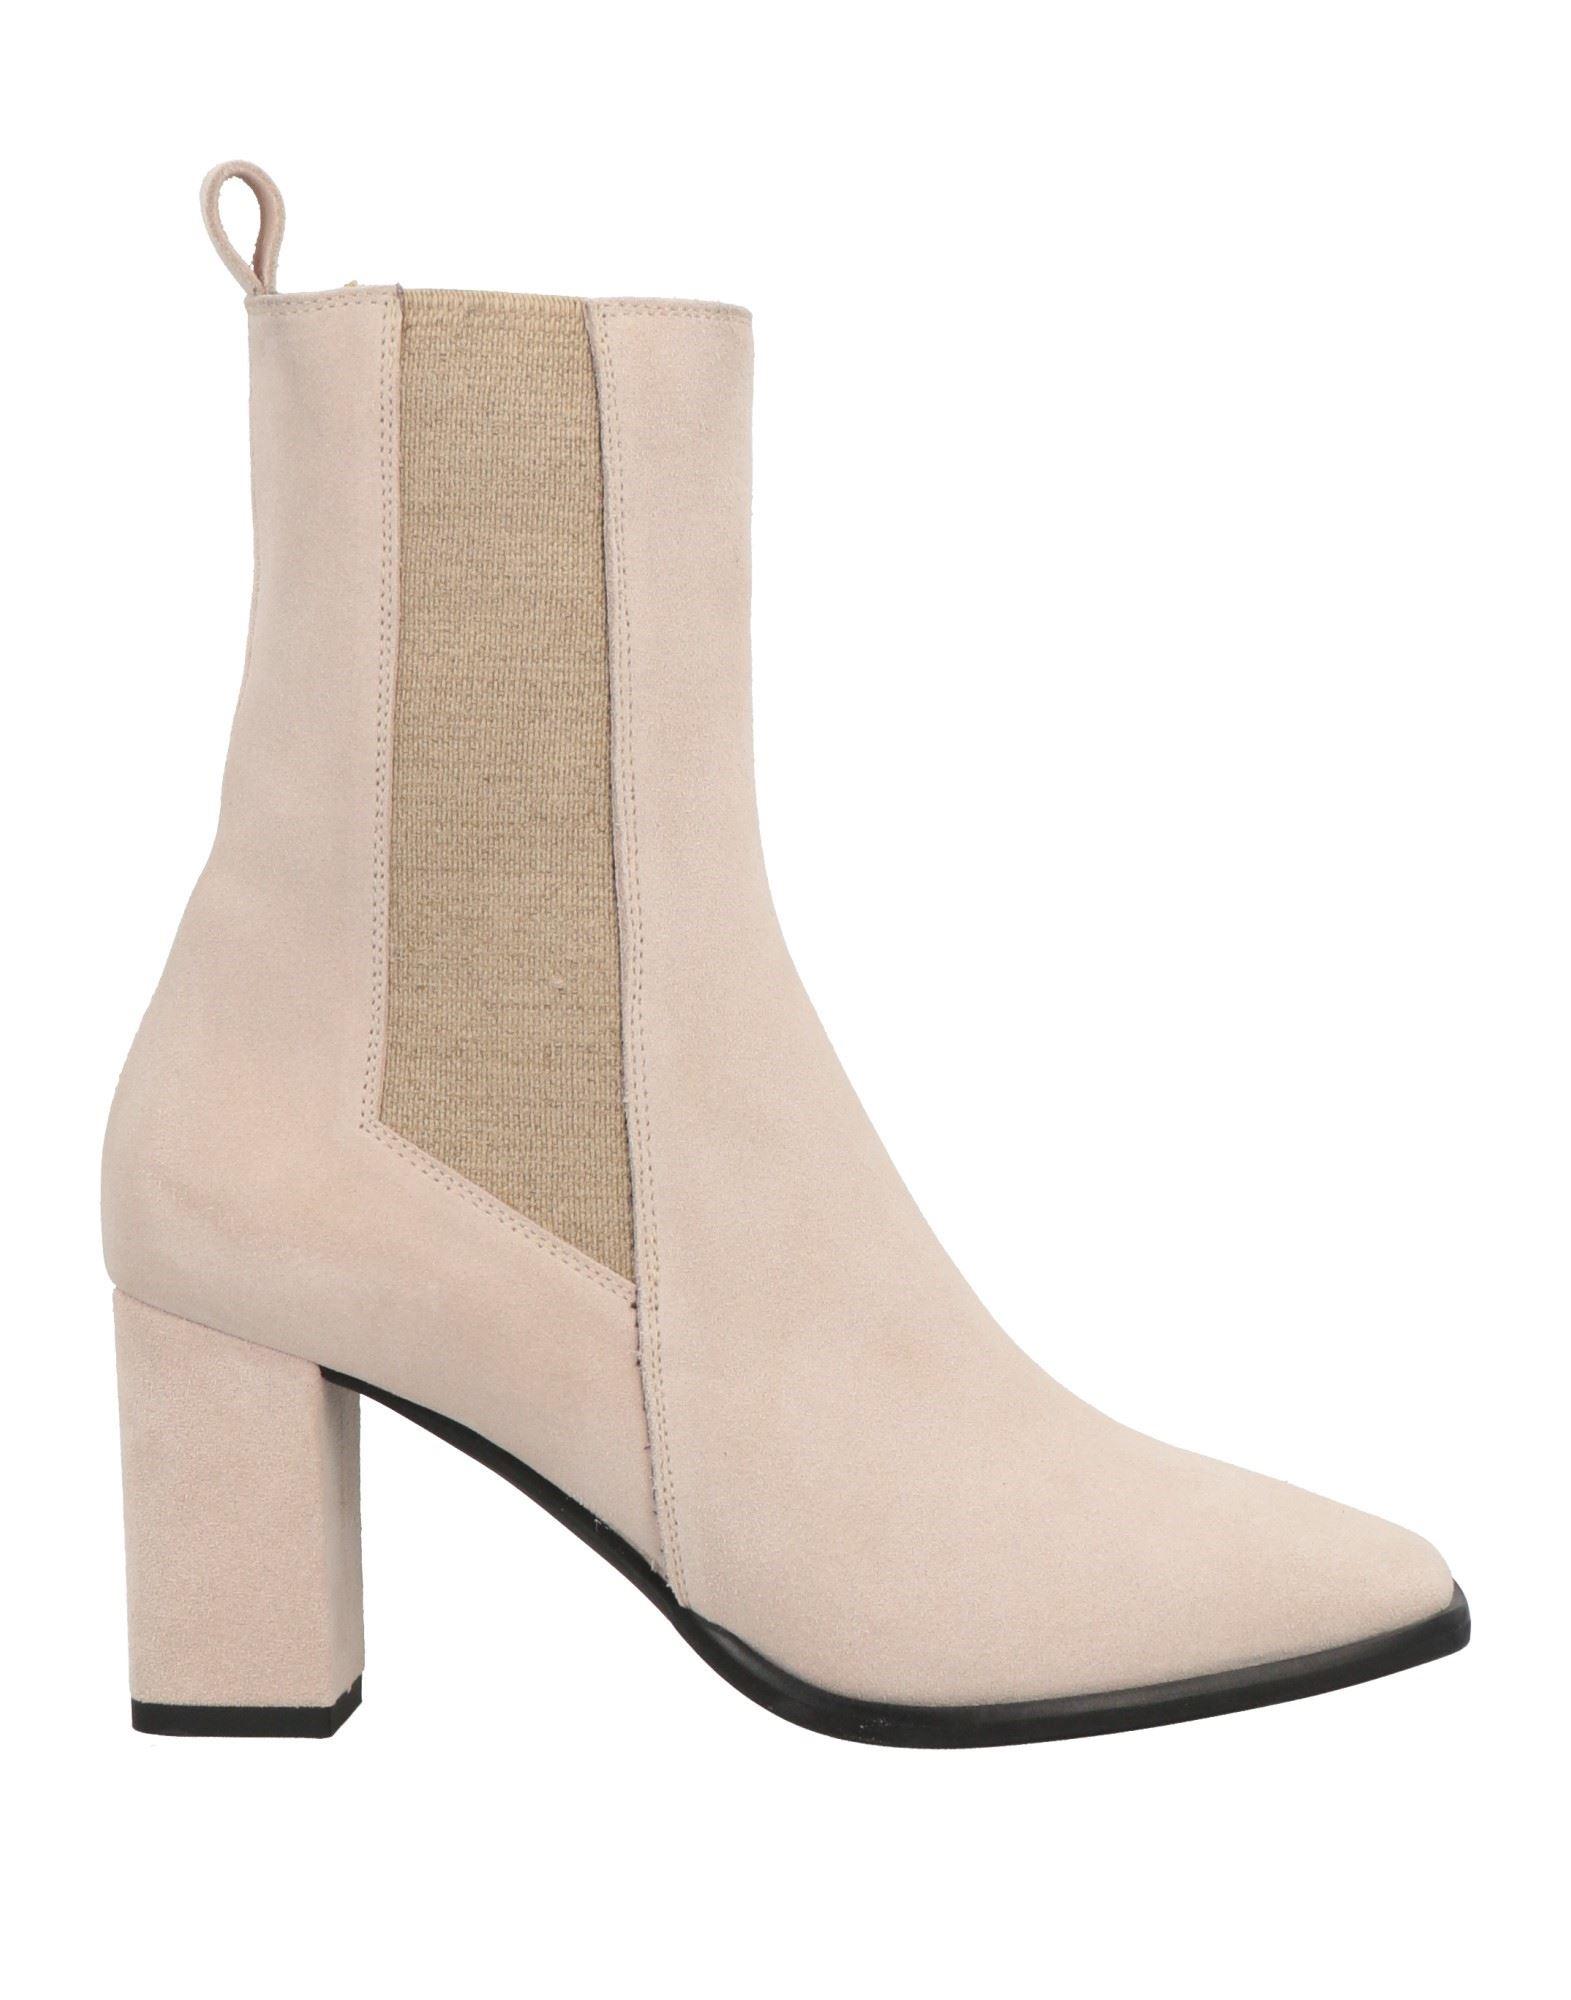 Janet & Janet Ankle Boots in Natural | Lyst